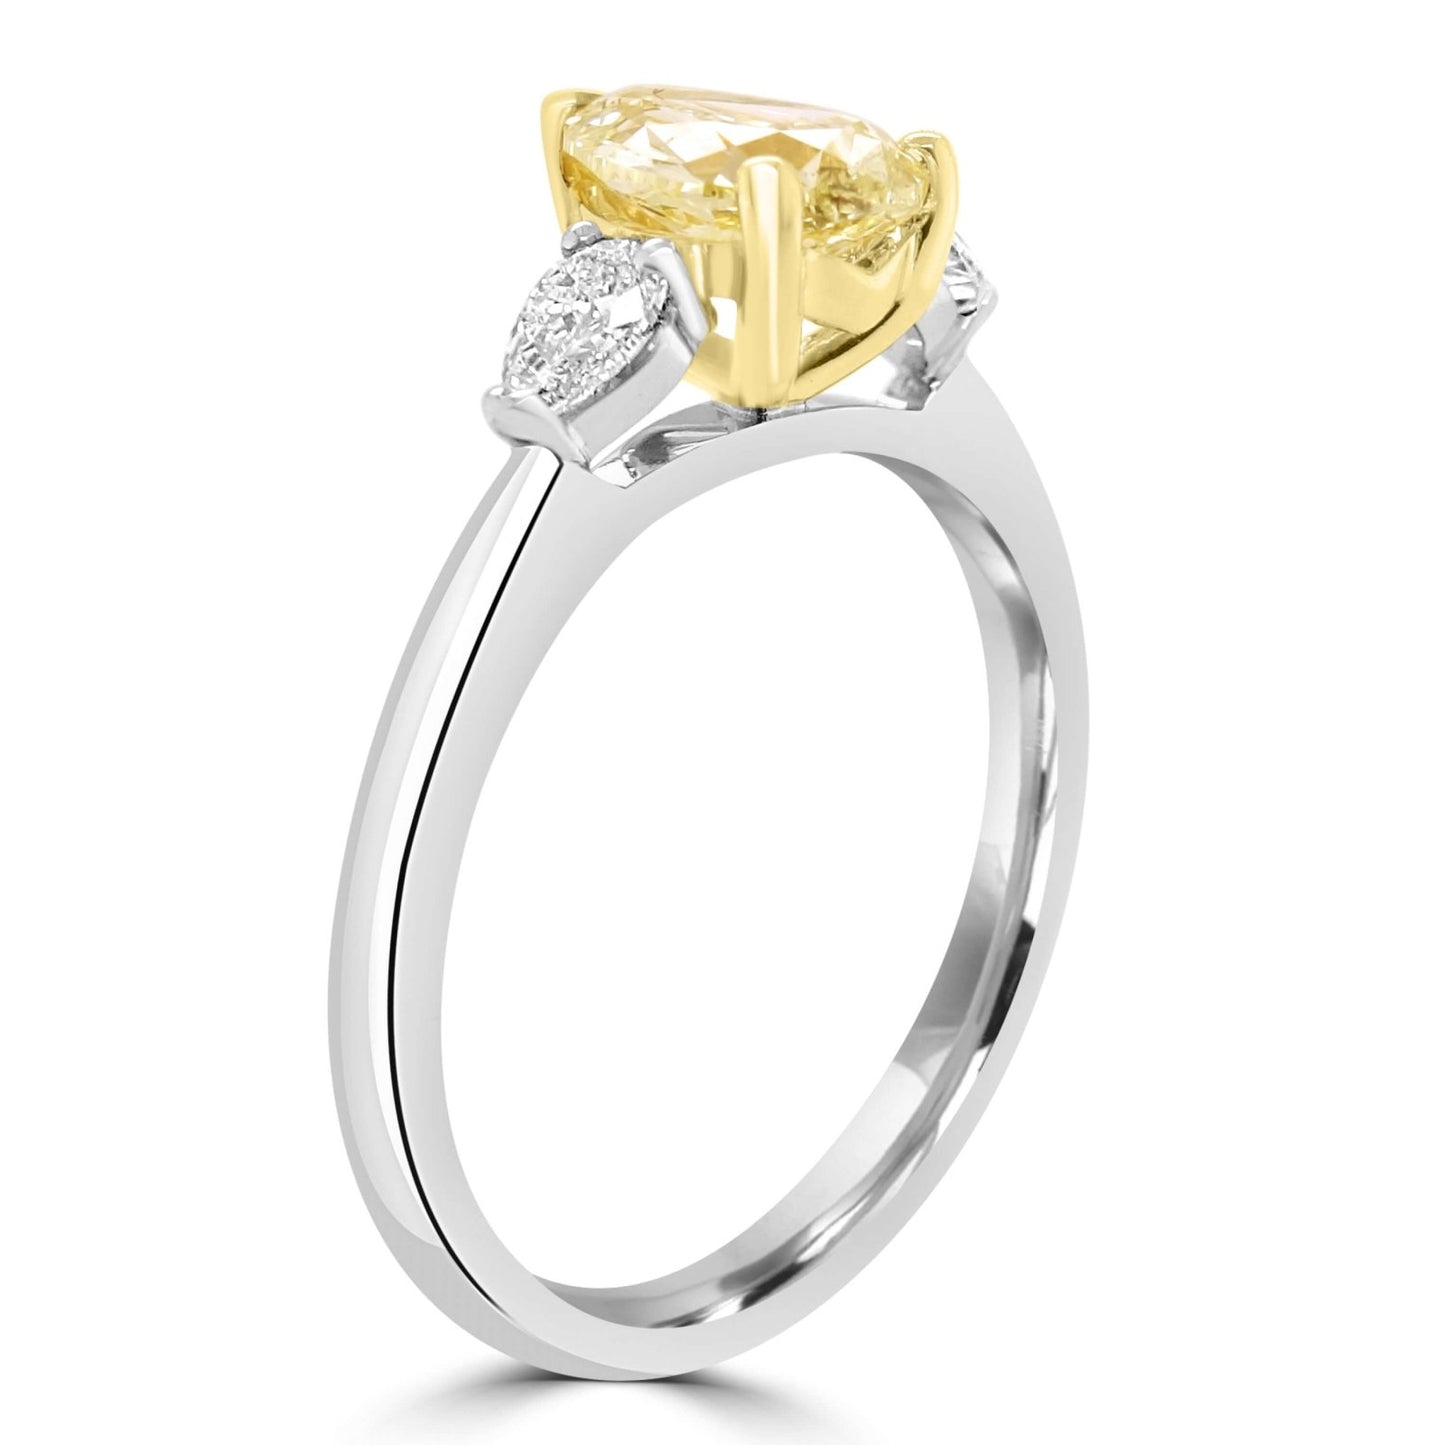 Side view of Fancy Yellow Pear Shaped Diamond Engagement Ring on a white background.